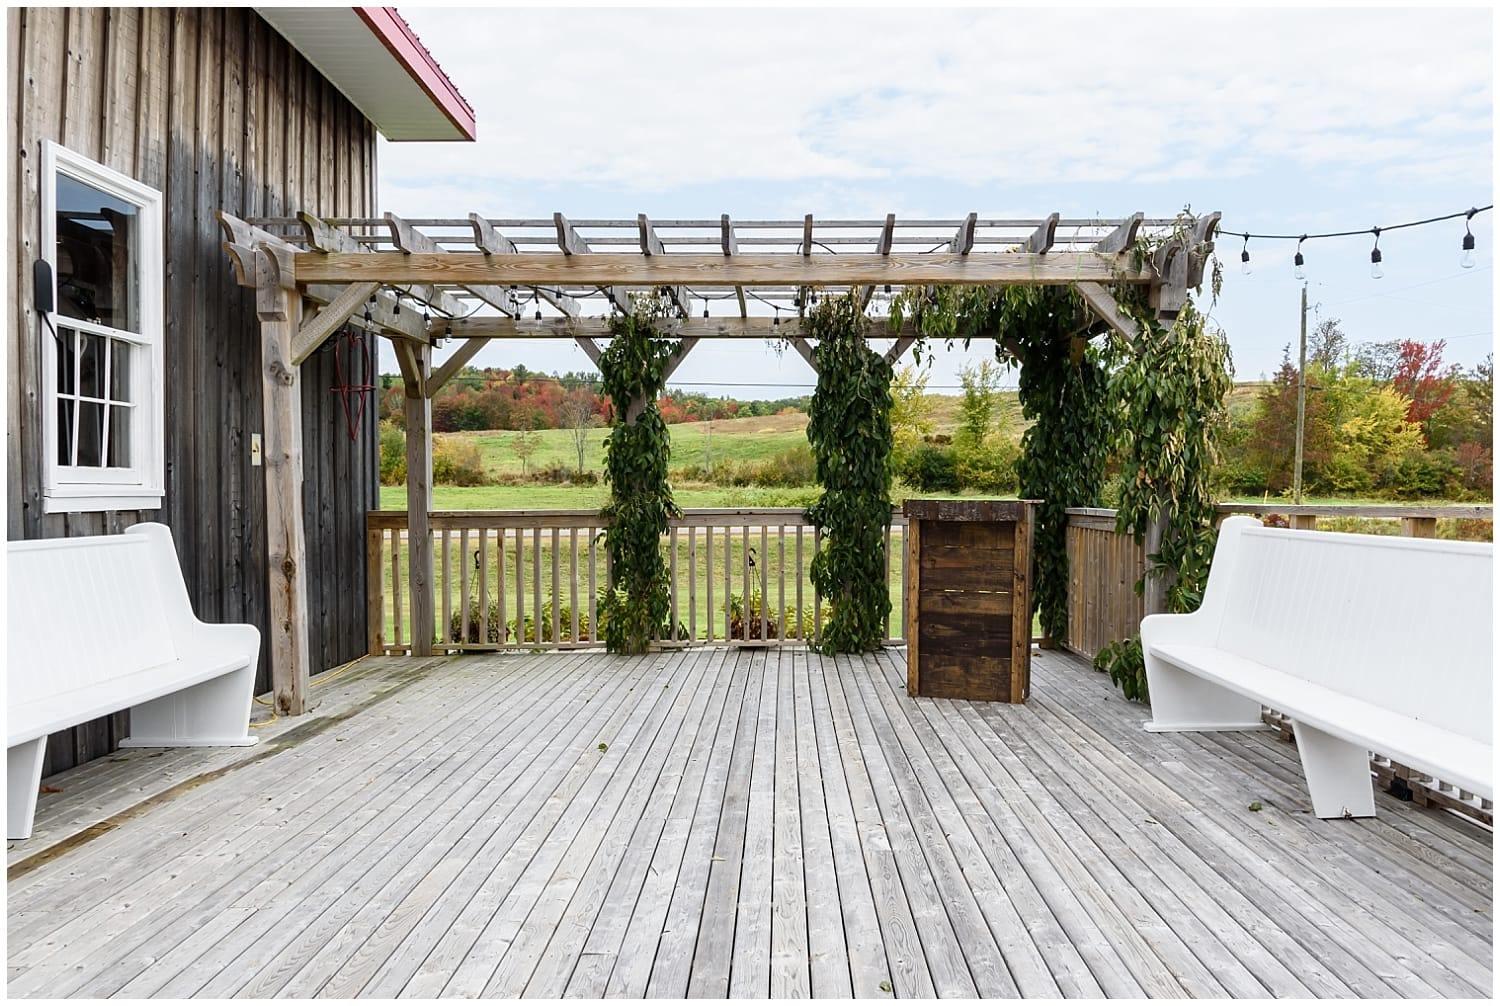 The balcony area for wedding speeches at the Barn at Sadie Belle Farm in Hantsport, NS.